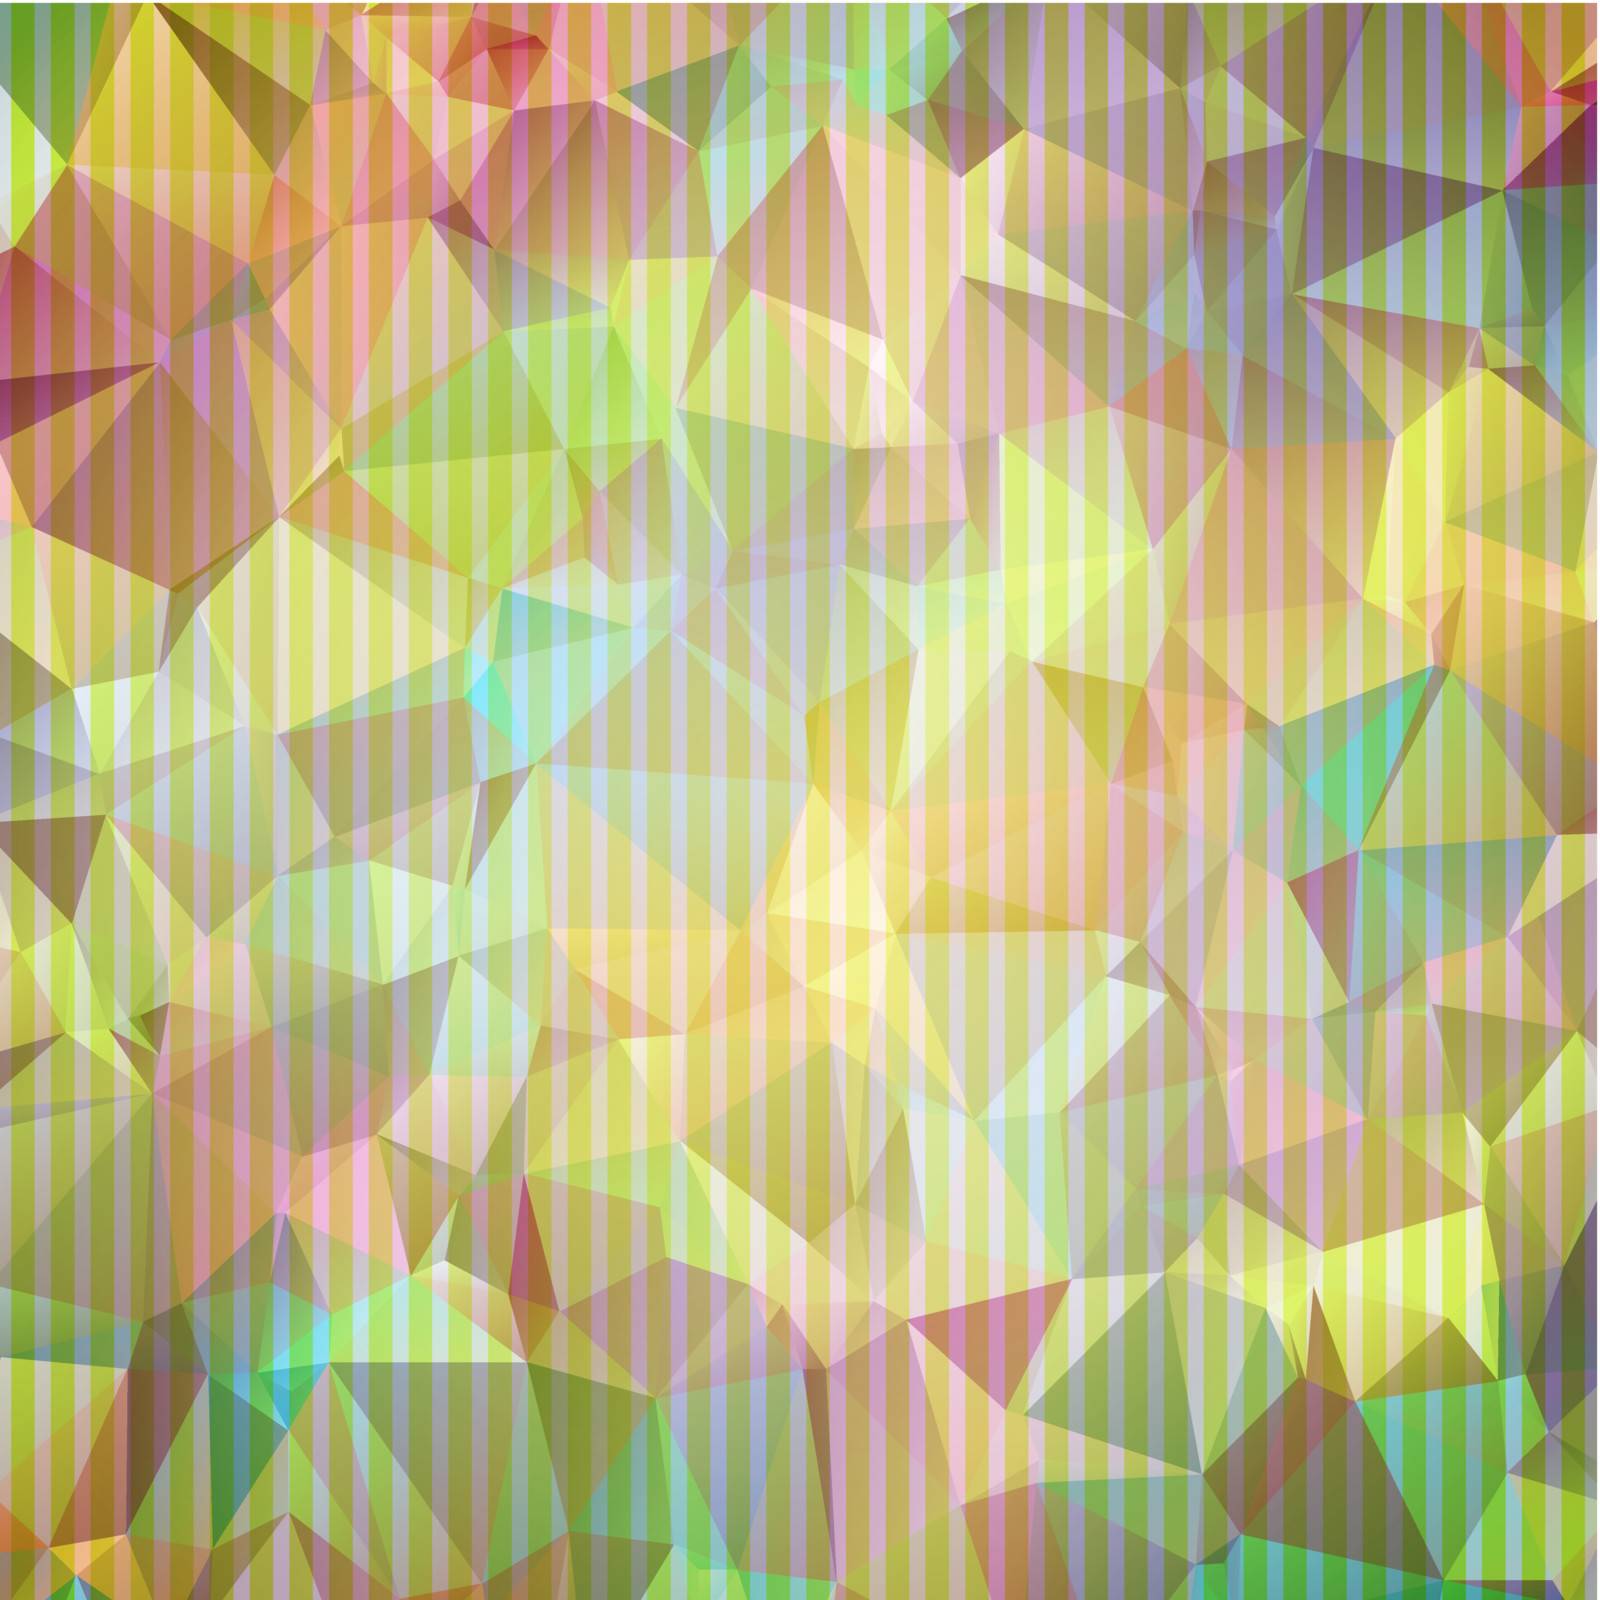 Abstract Triangle Geometrical Multicolored Background, Vector Illustration Eps10, Transparent Objects